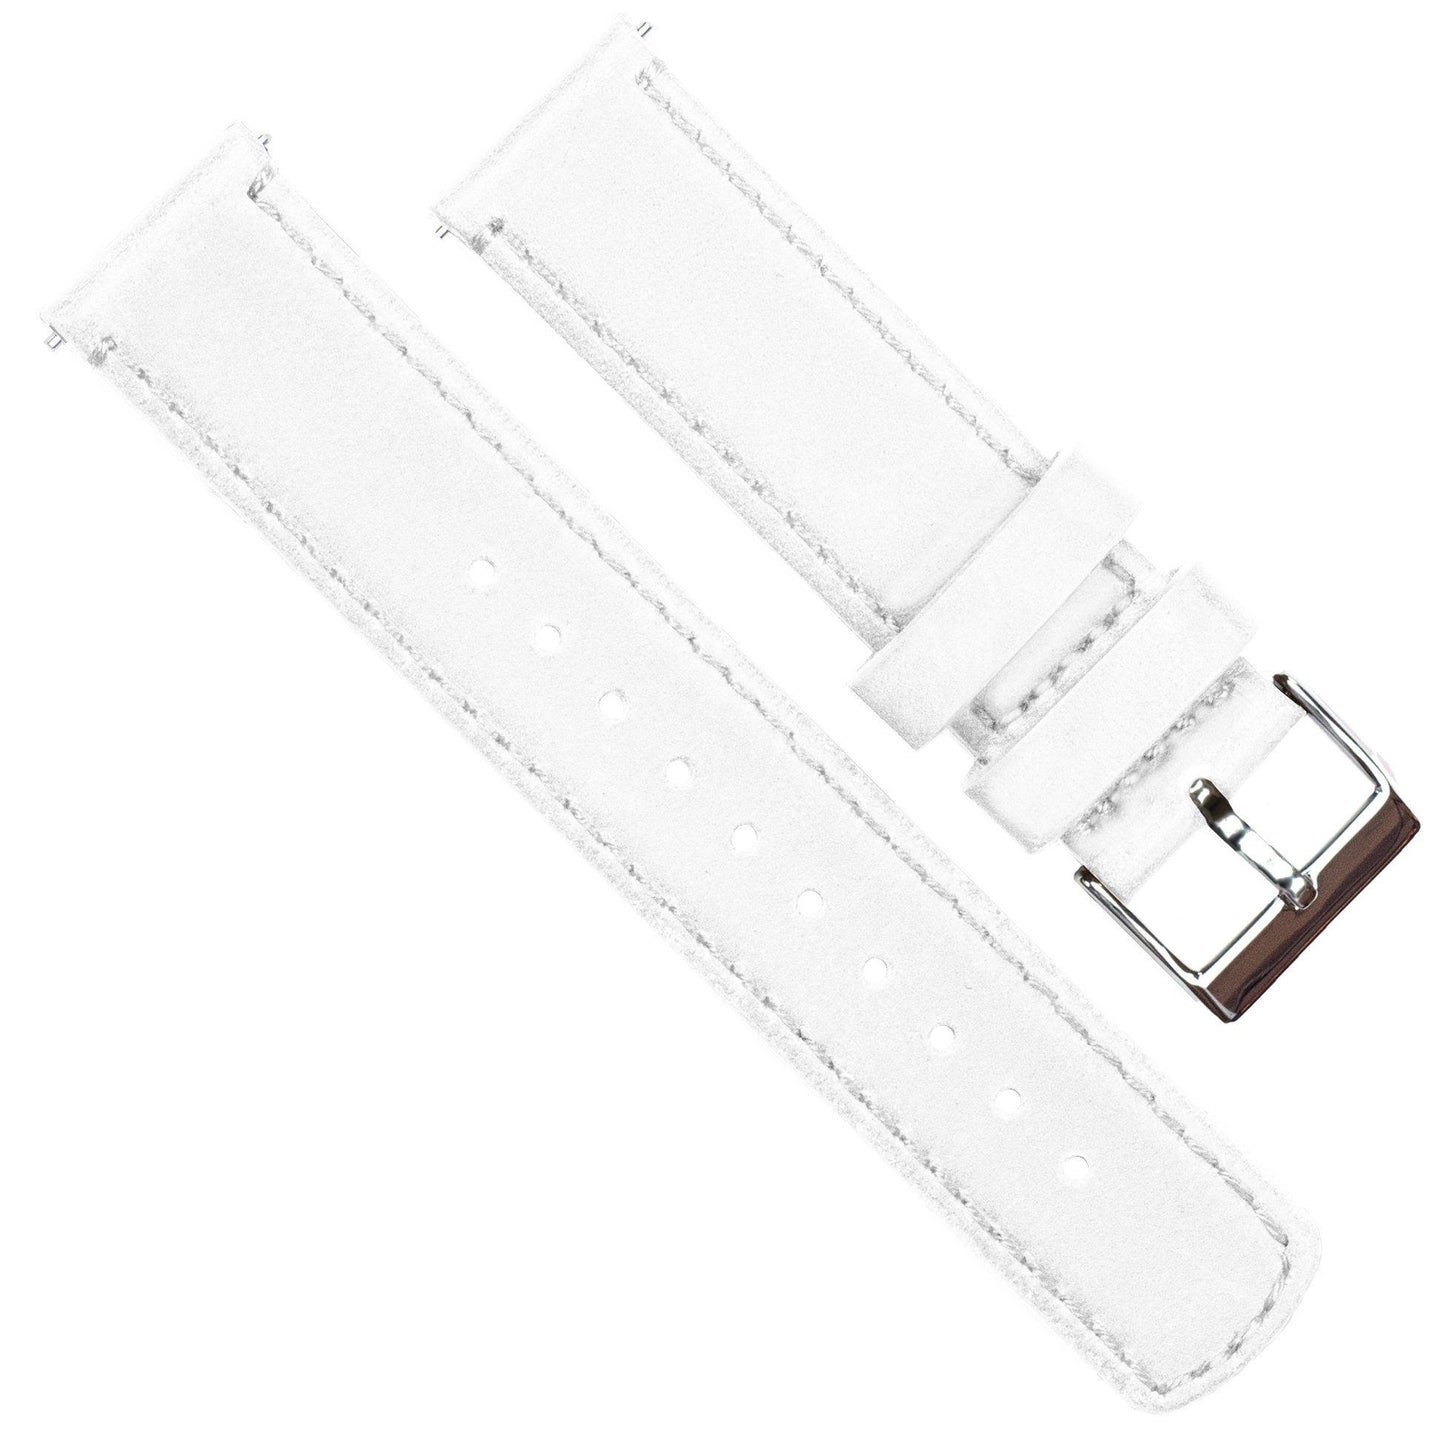 Fossil Q |  White Leather & Stitching - Barton Watch Bands